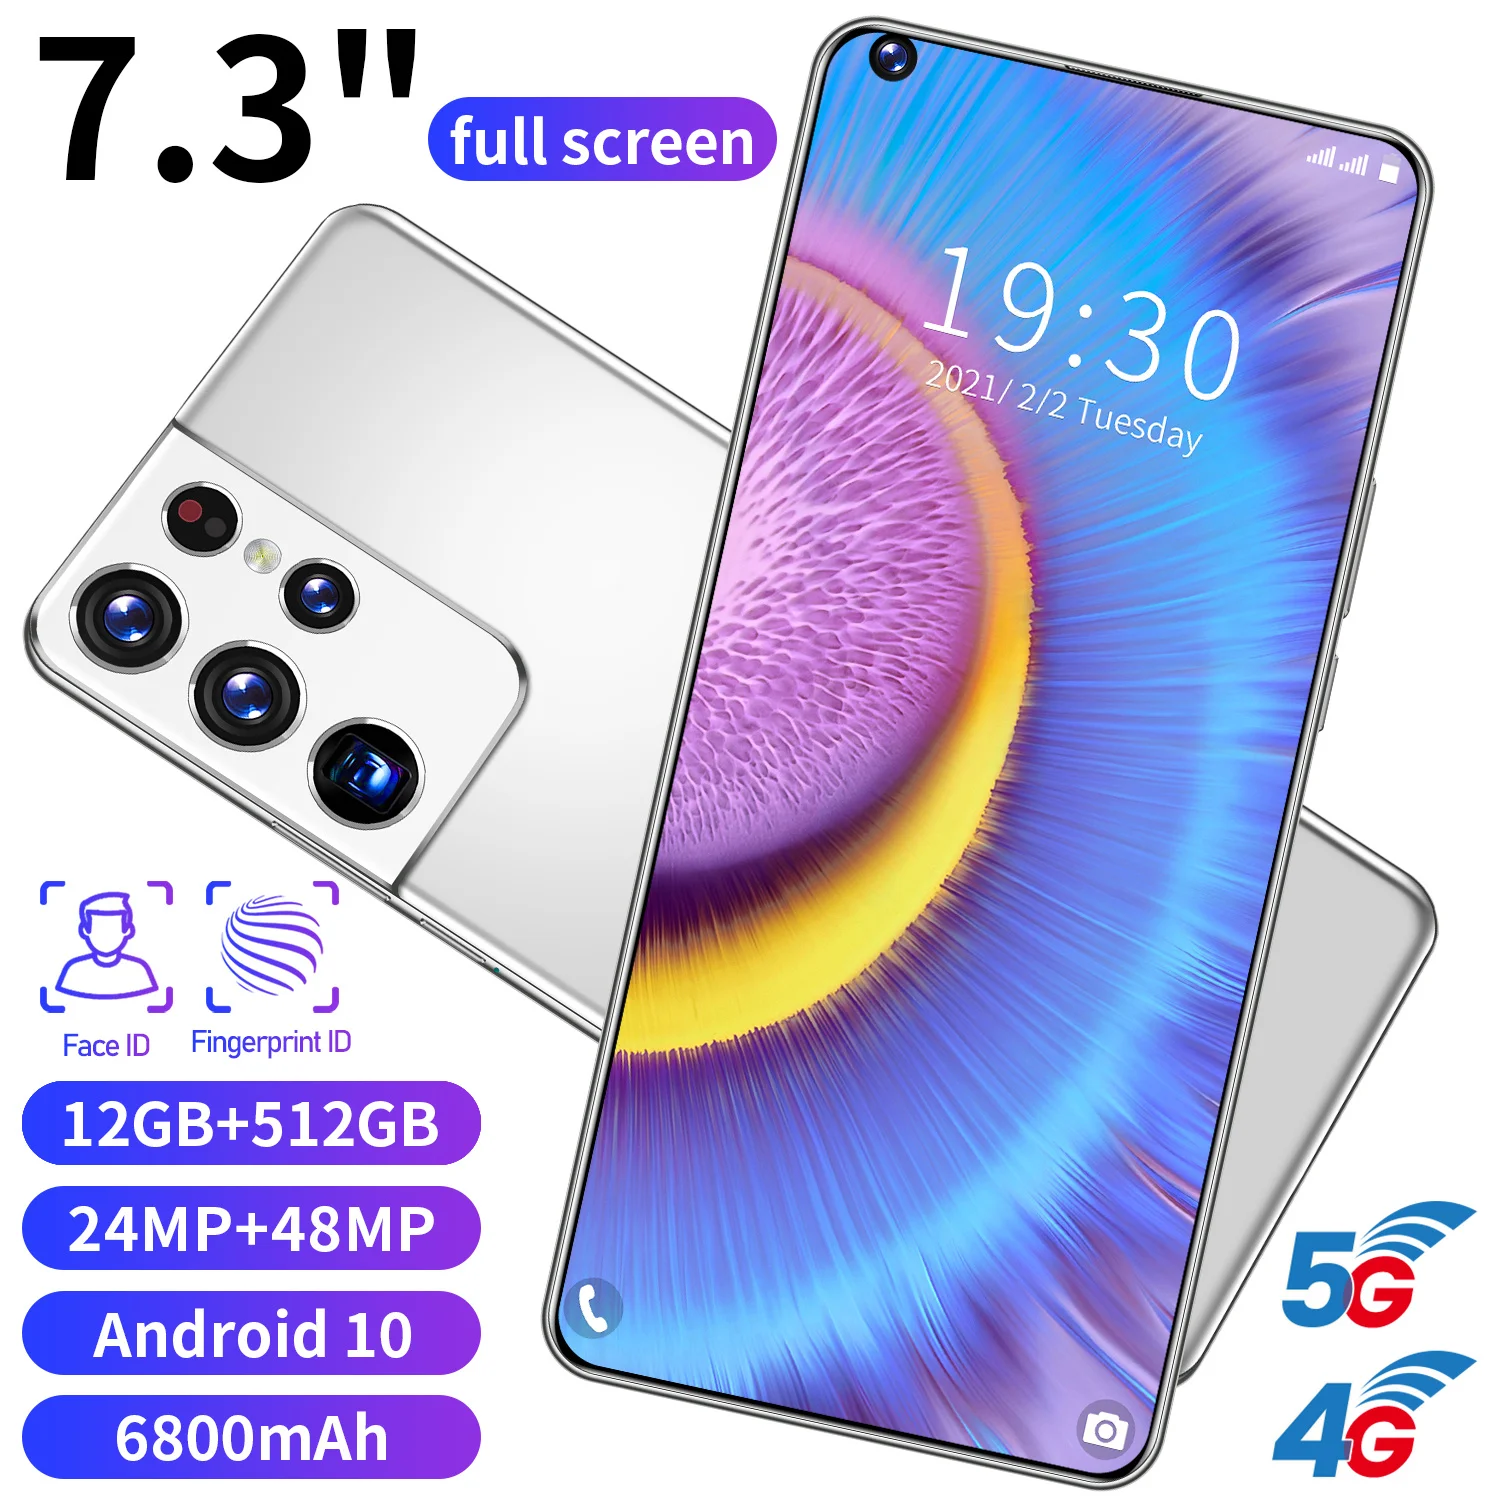 

S21 Ultra Smartphone 7.3 Inch 6800mah Dual SIM 4G 5G Android 10.0 24MP+ 48MP 12GB+ 512GB Face wake Global Version Network Phone